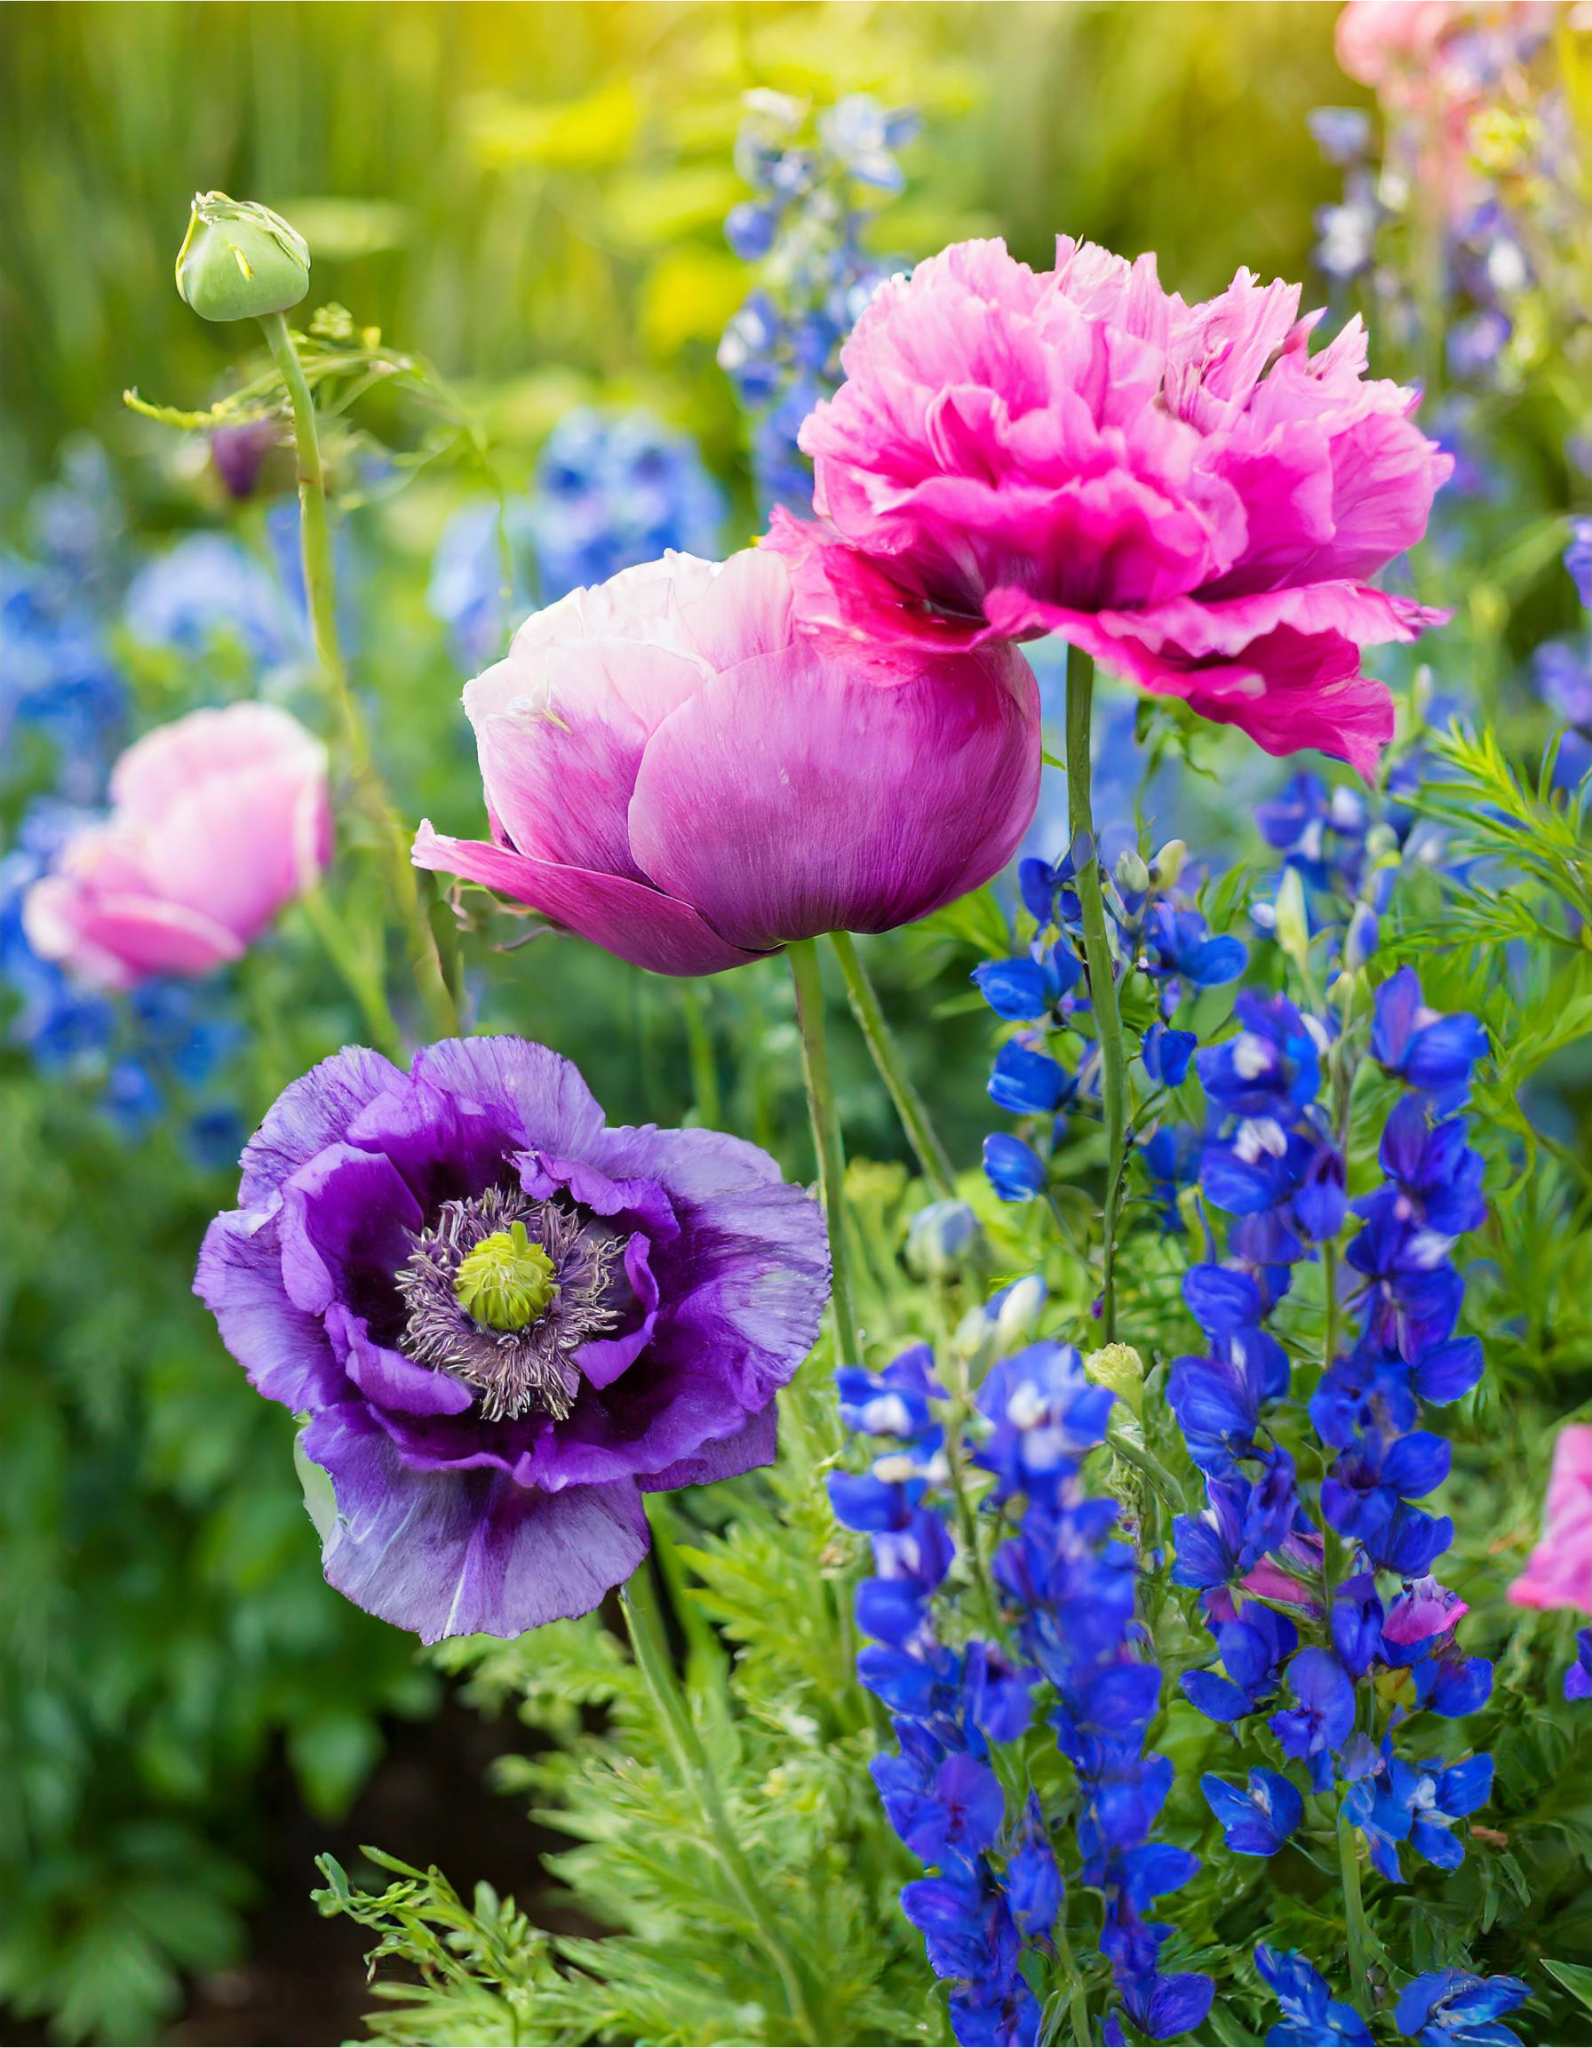 Poppies and peonies